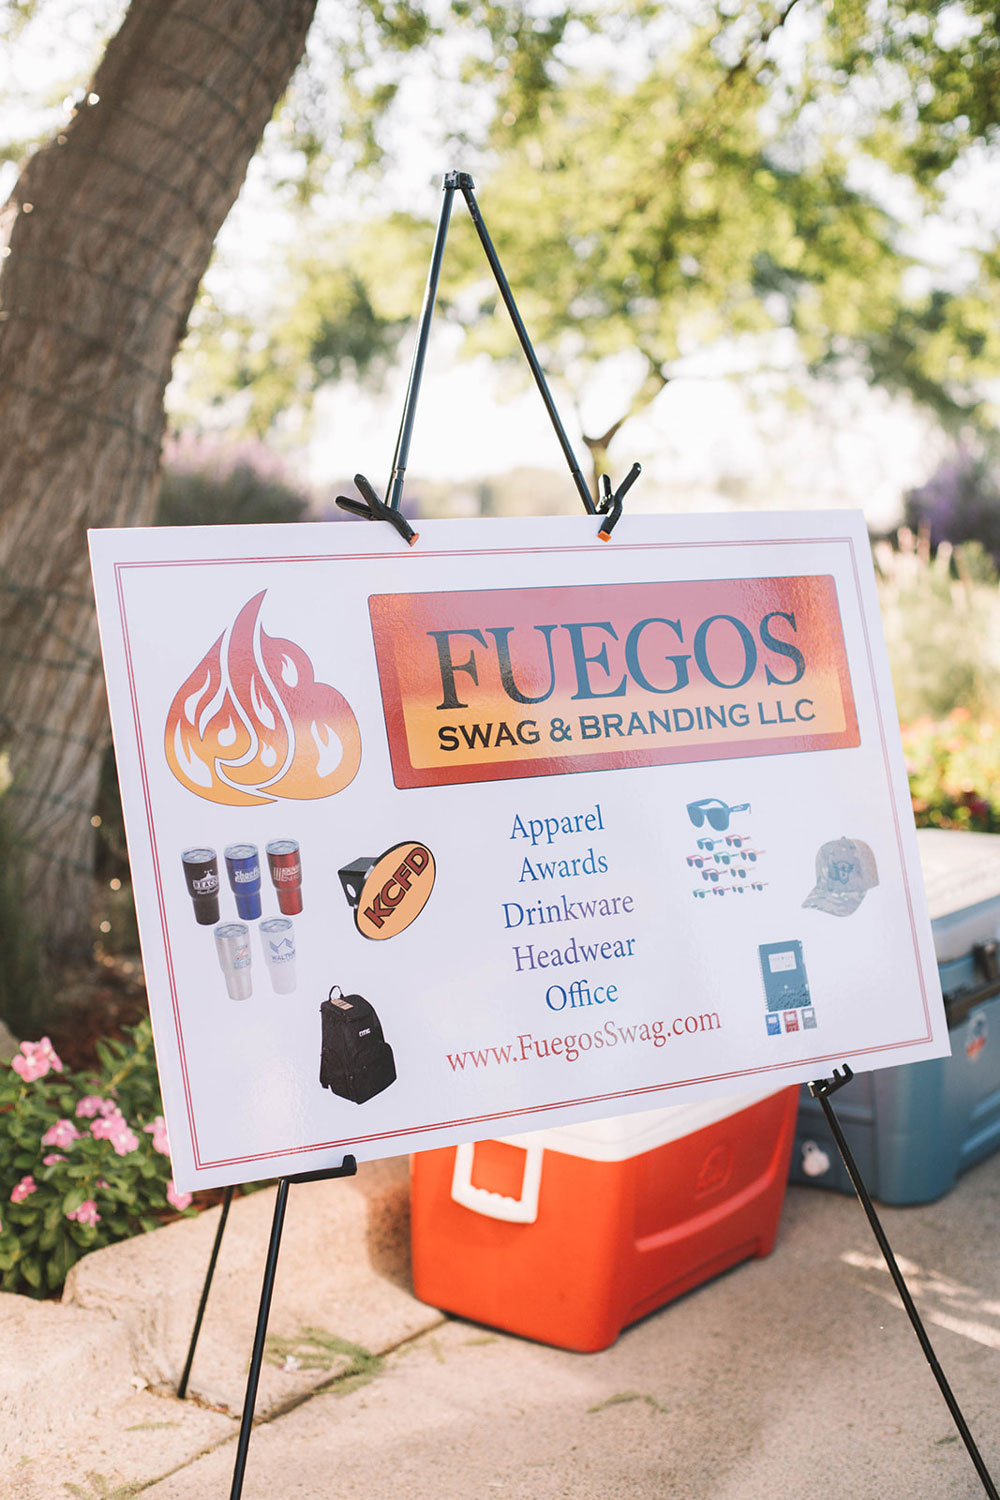 Fuegos Swag and Branding sign